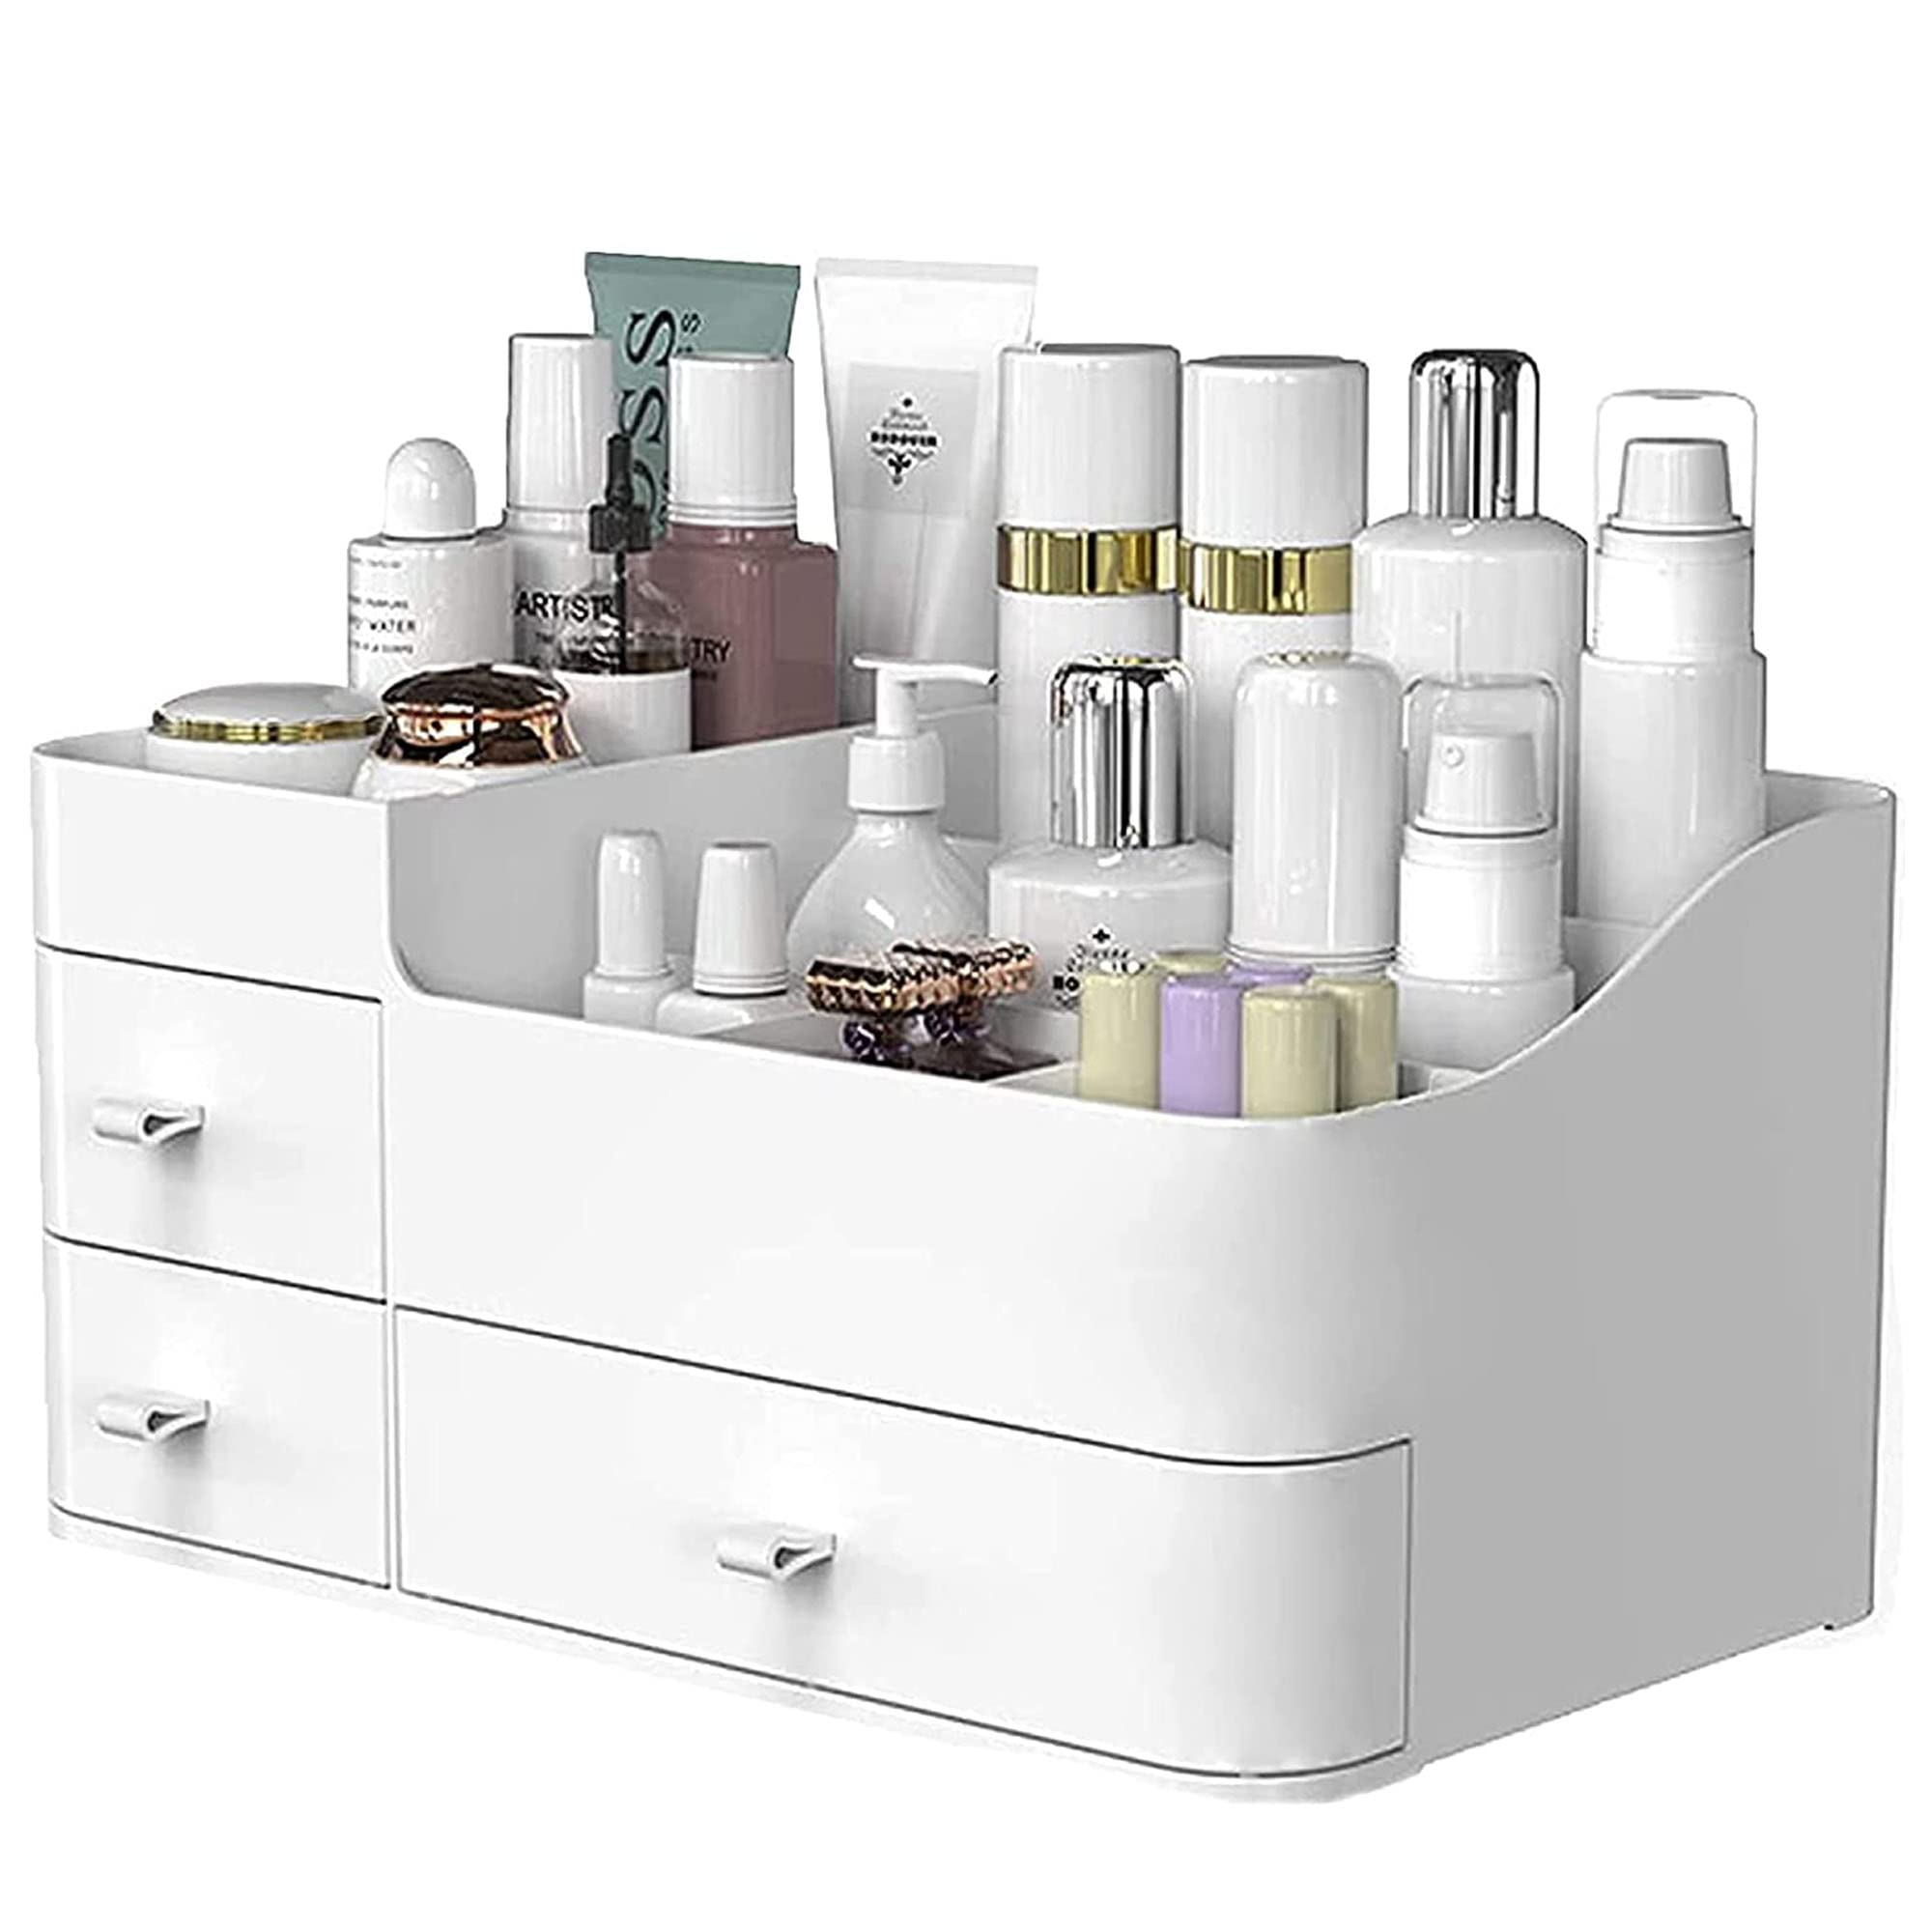 Makeup Organizer For Vanity, Large Capacity Desk Organizer With Drawers For  Cosmetics, Lipsticks, Jewelry, Nail Care, Skincare, Ideal For Bedroom And